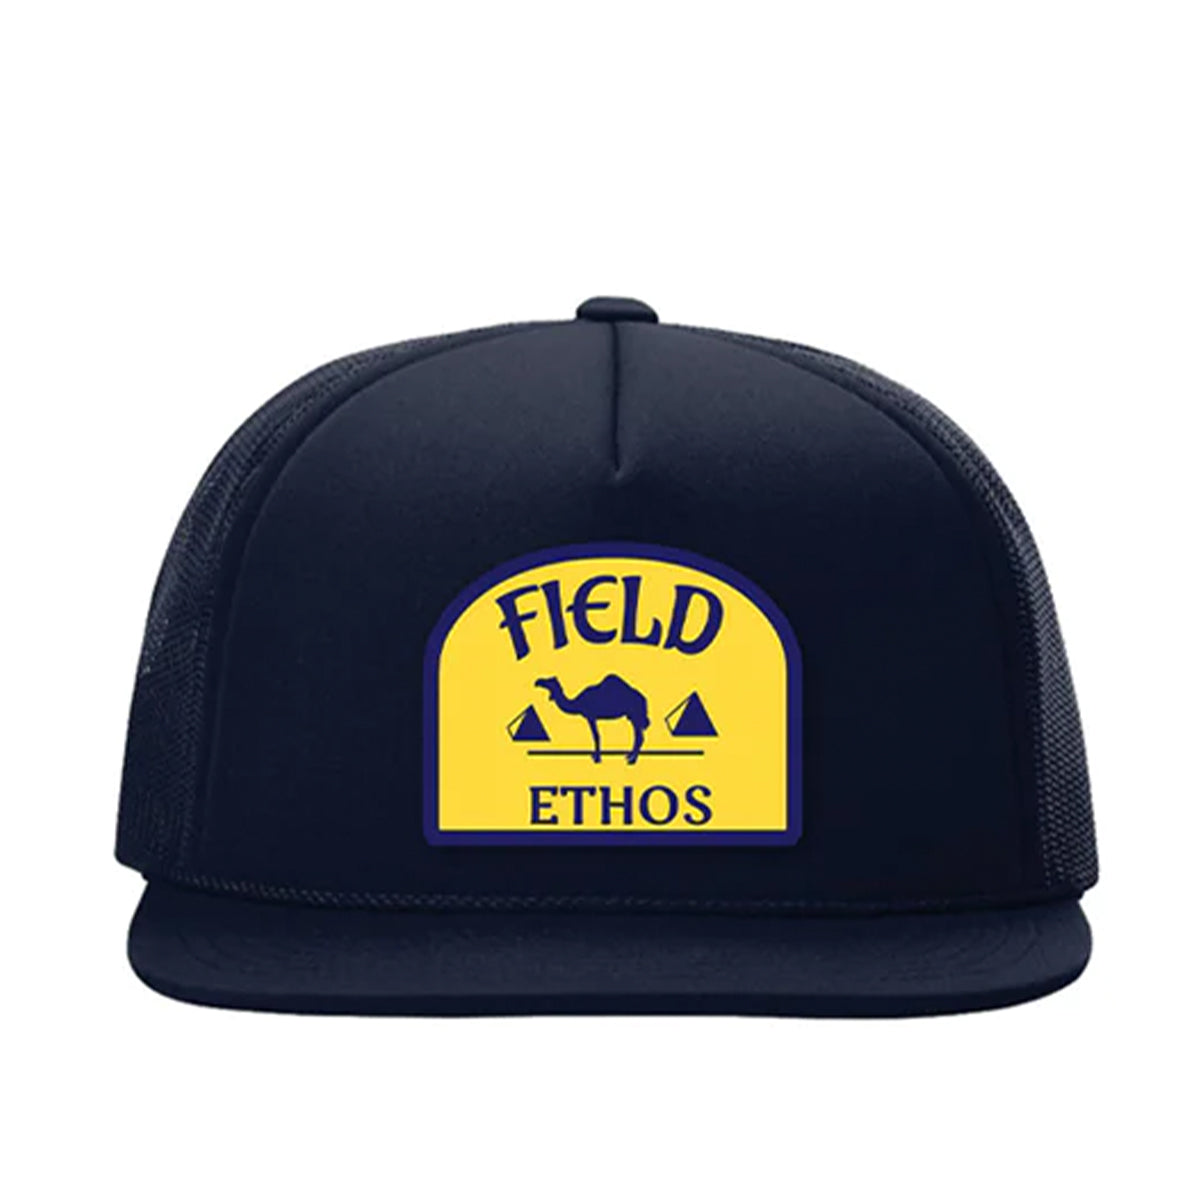 The Field Ethos Rover Field – Journal Ethos Hat